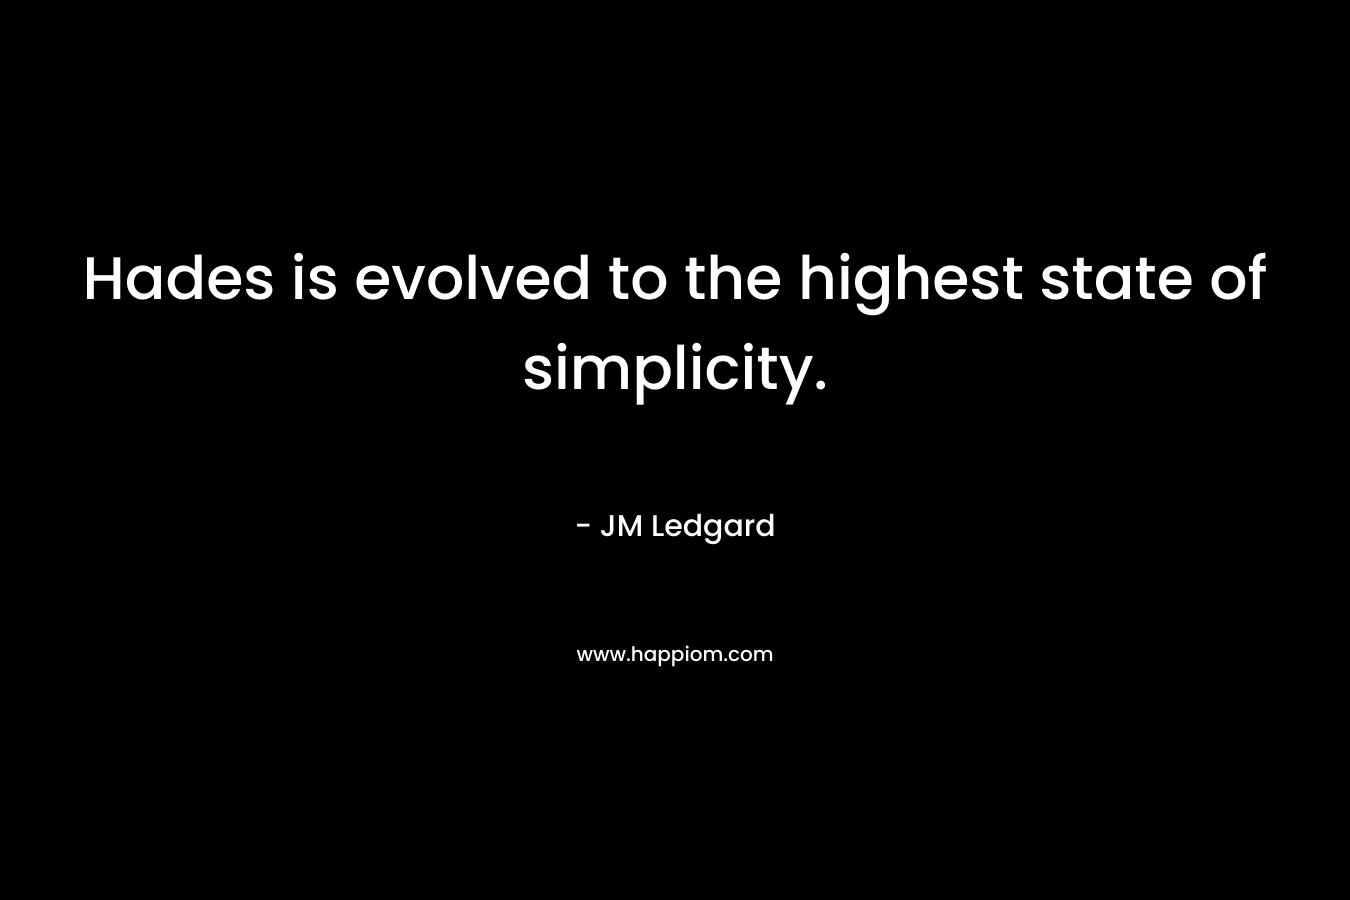 Hades is evolved to the highest state of simplicity. – JM Ledgard